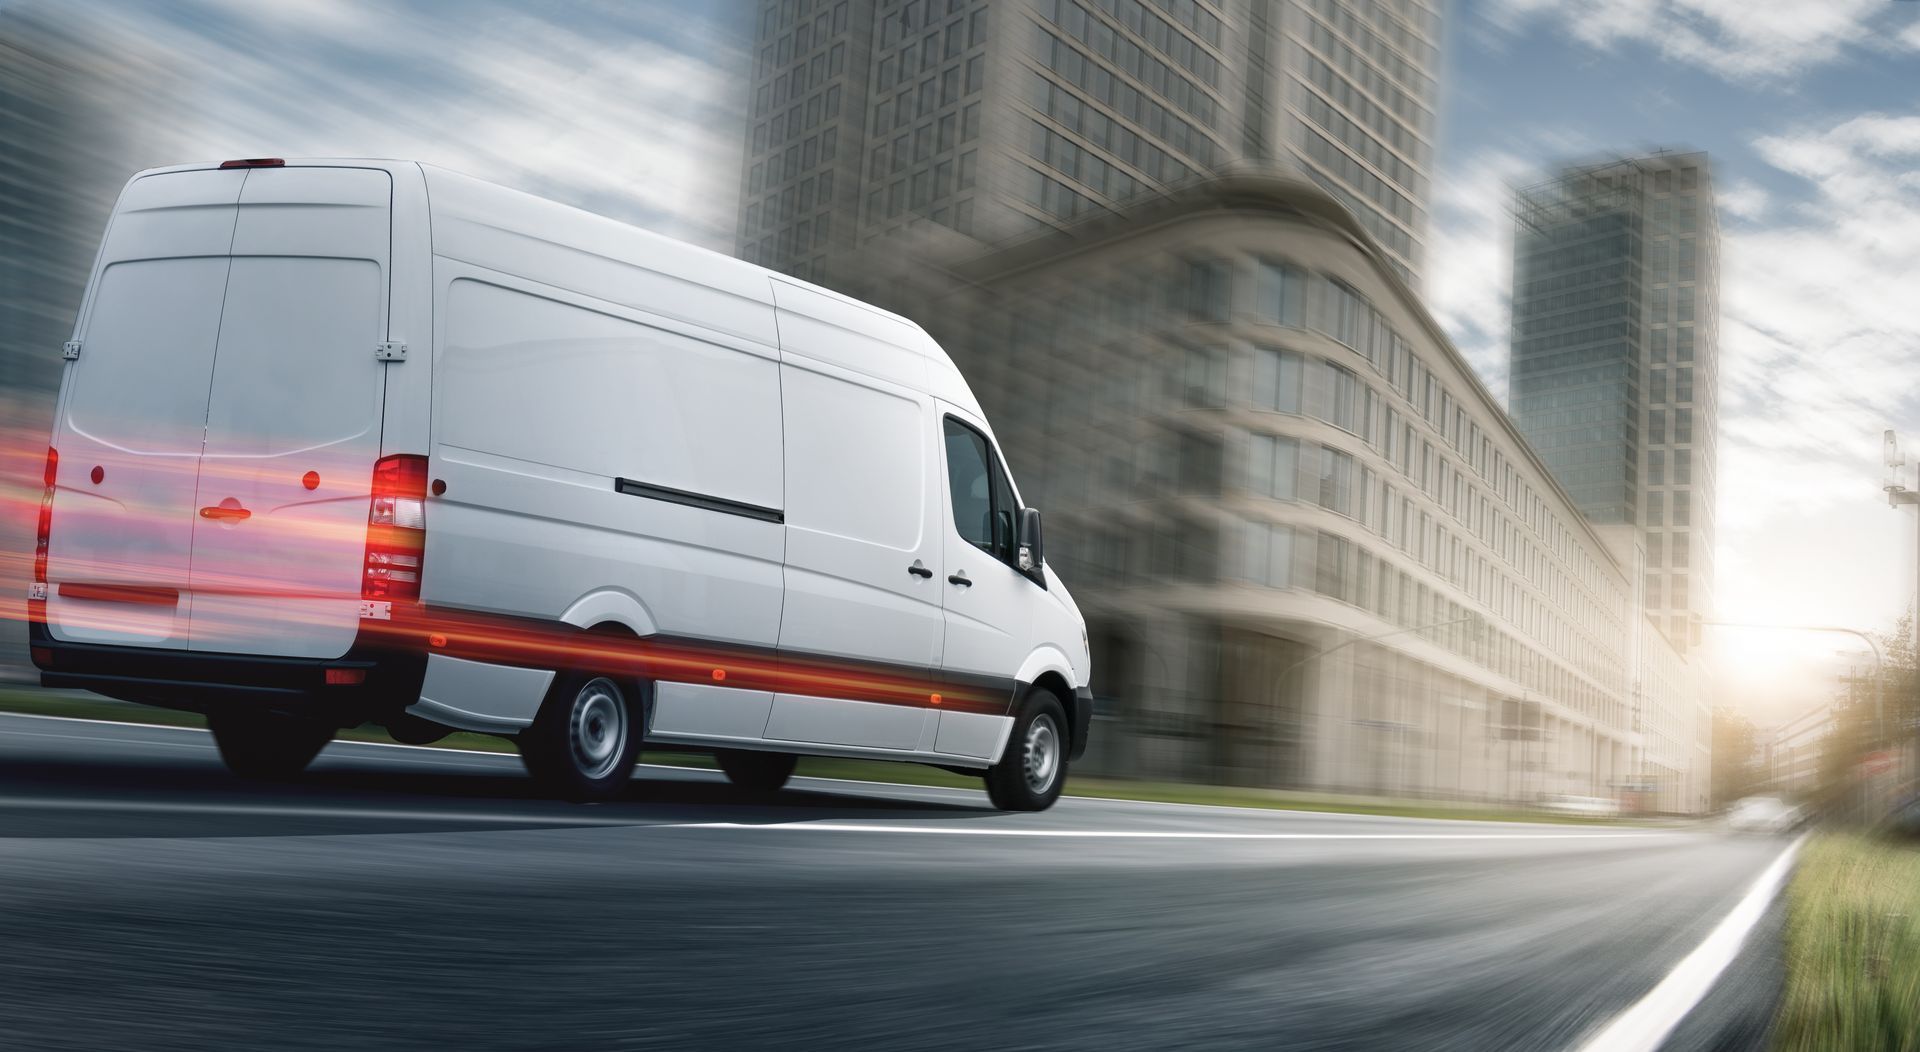 Fast moving delivery van